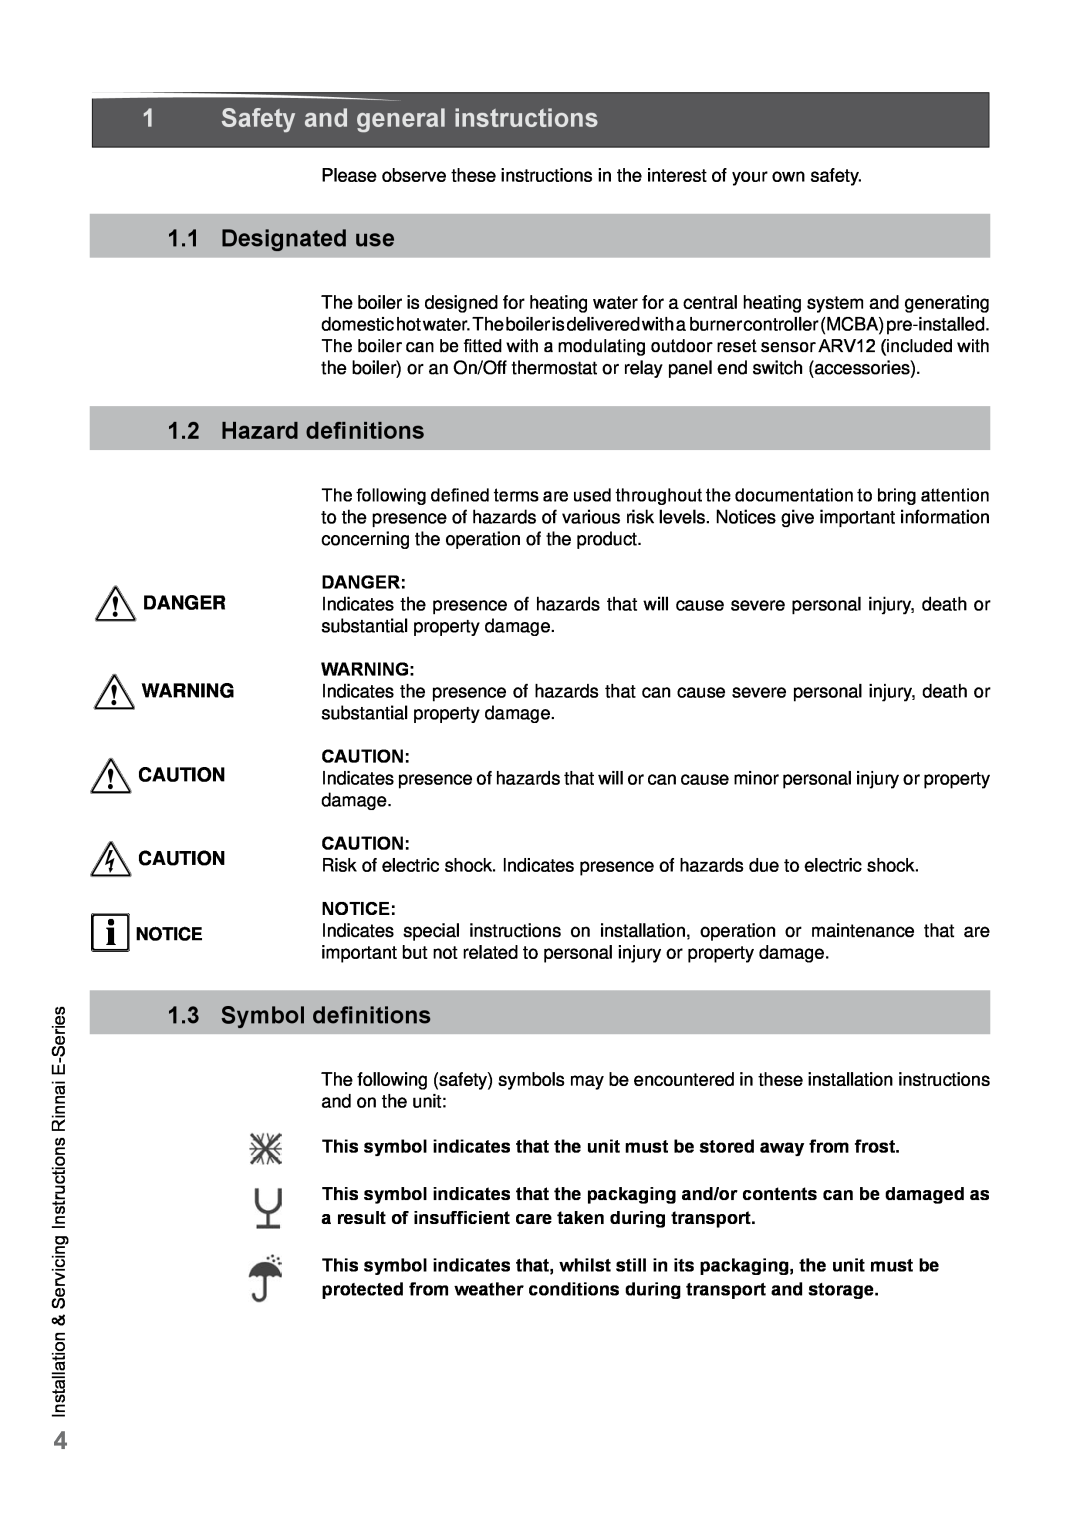 Rinnai E110CP, E75CN 1Safety and general instructions, Designated use, Hazard definitions, Symbol definitions, Danger 